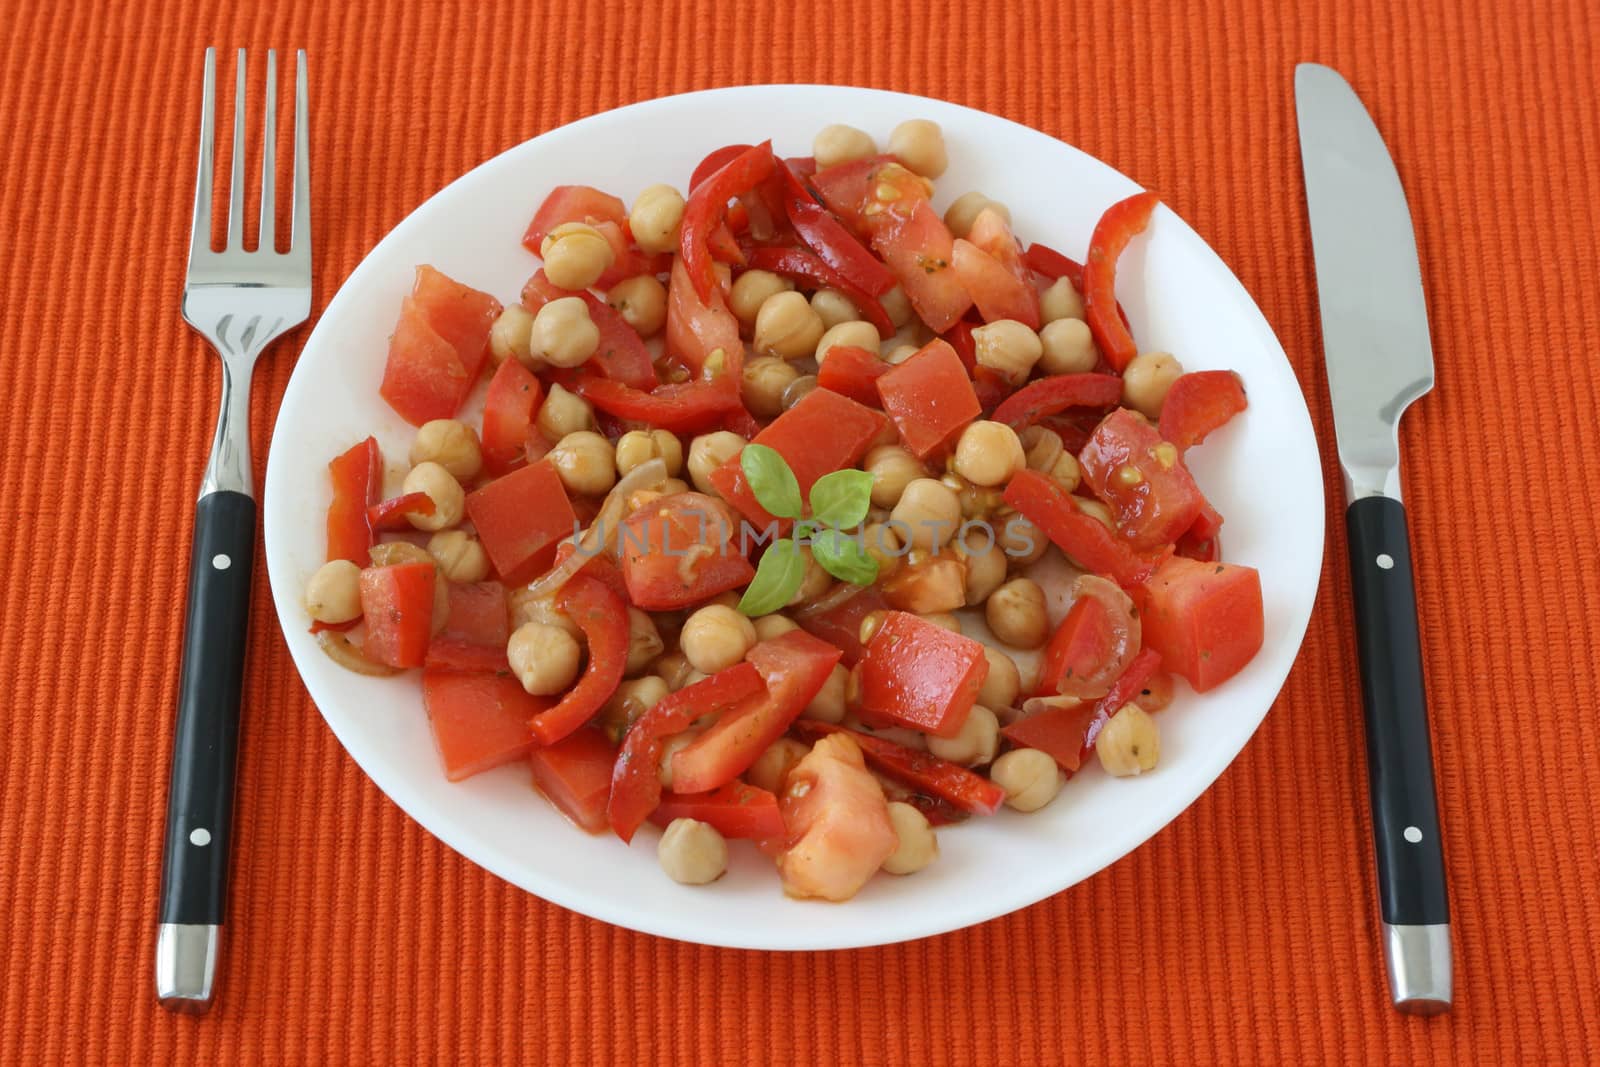 salad with chick-pea